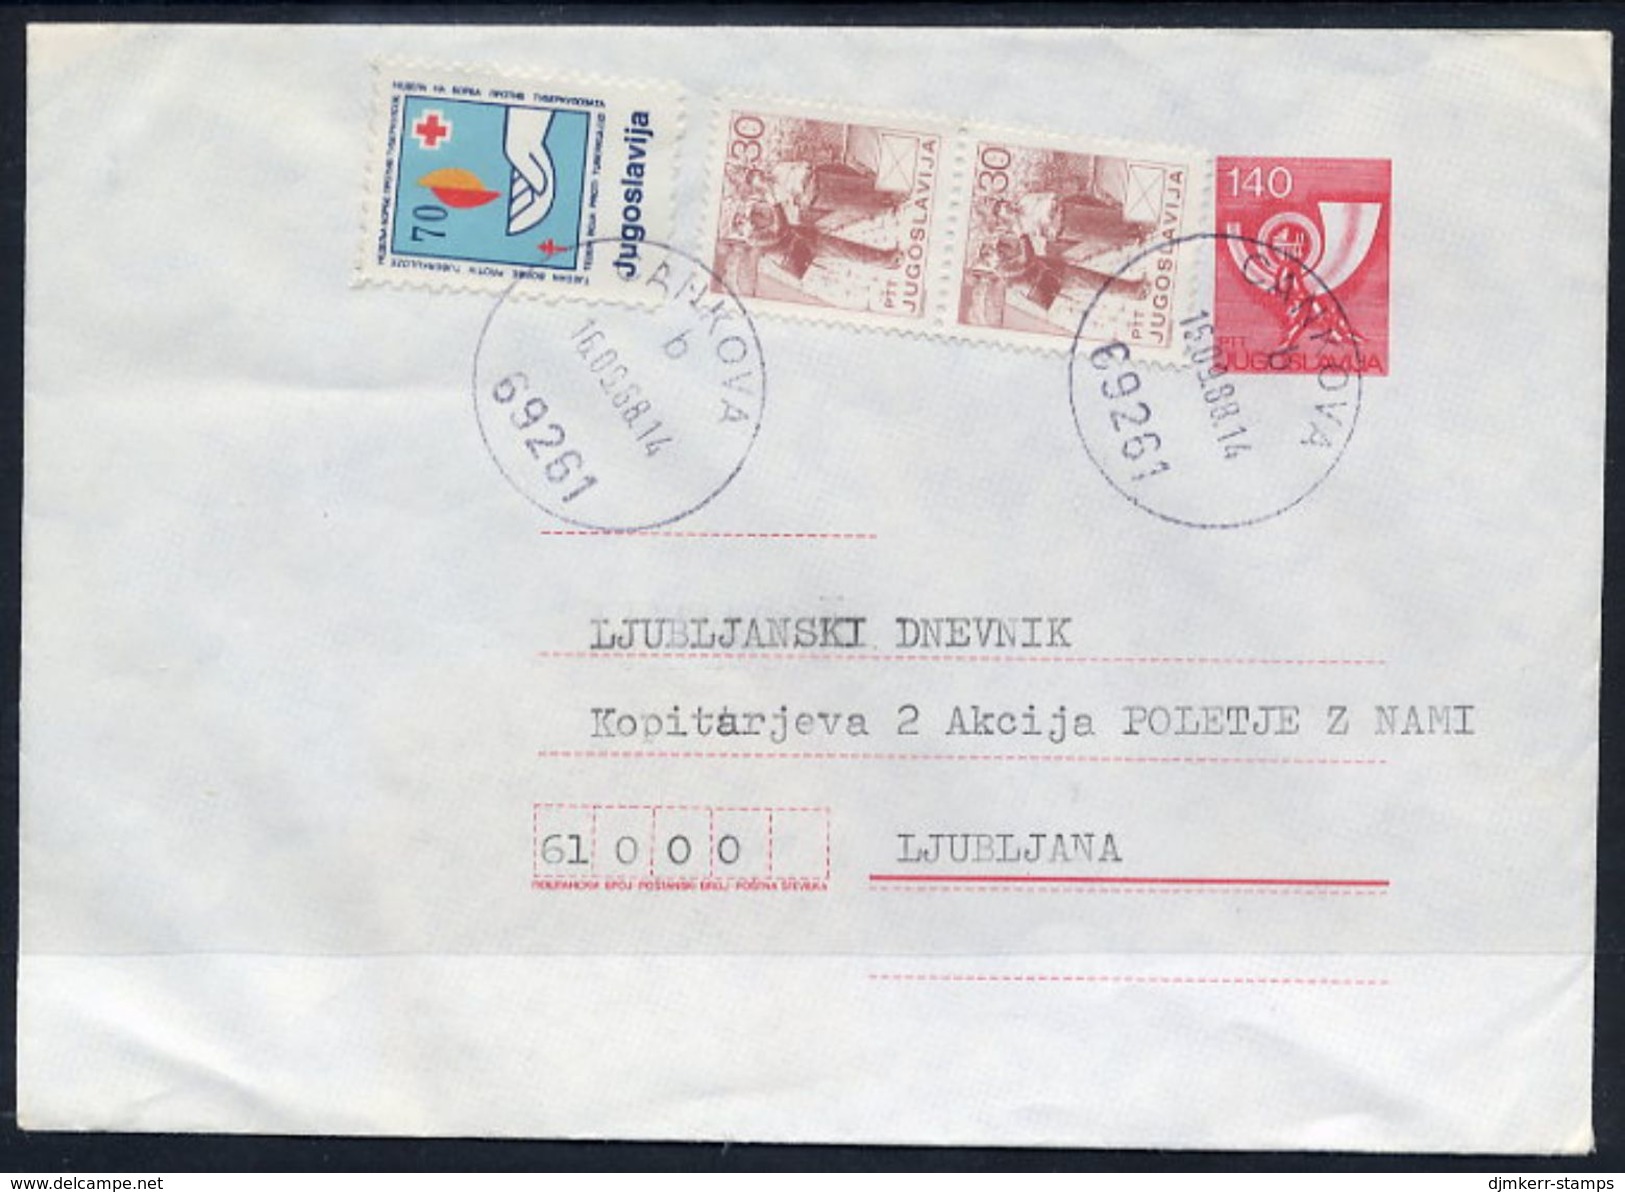 YUGOSLAVIA 1988 Posthorn 140 D.stationery Envelope Used With Additional Franking And TB Week Tax.  Michel U81 - Entiers Postaux